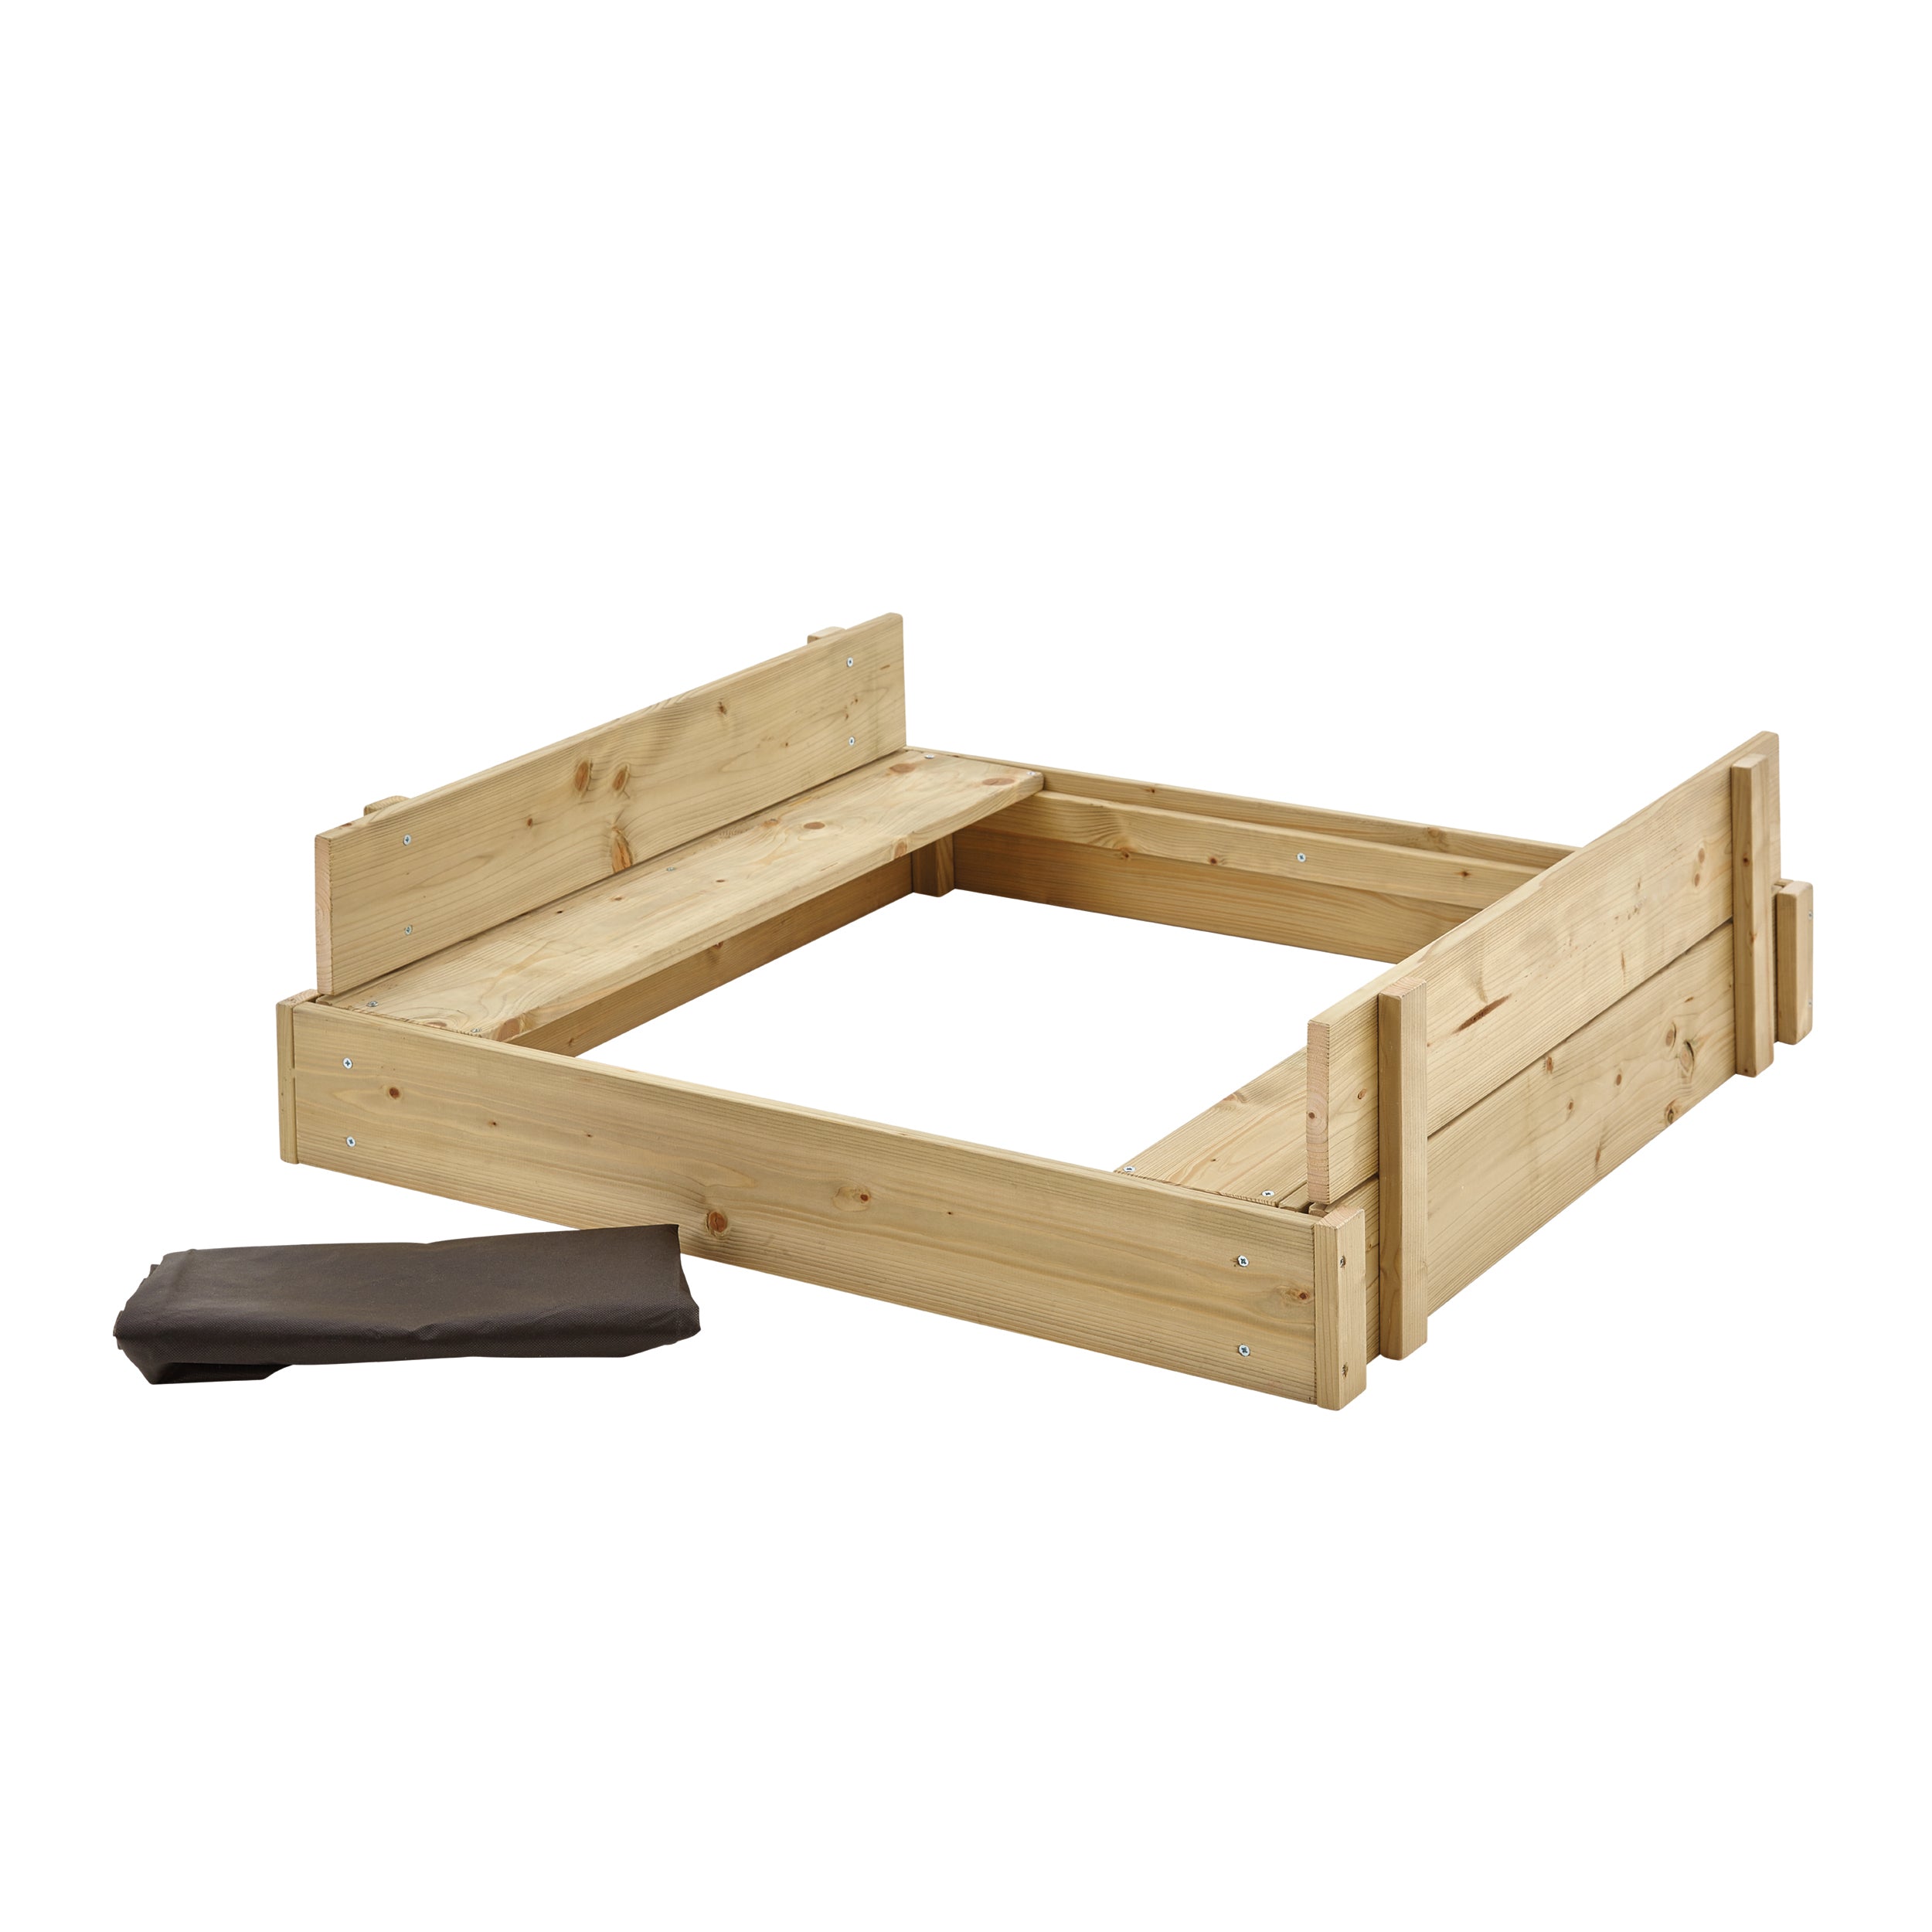 TP292 Wooden Lidded Sandpit With Sloted Cover